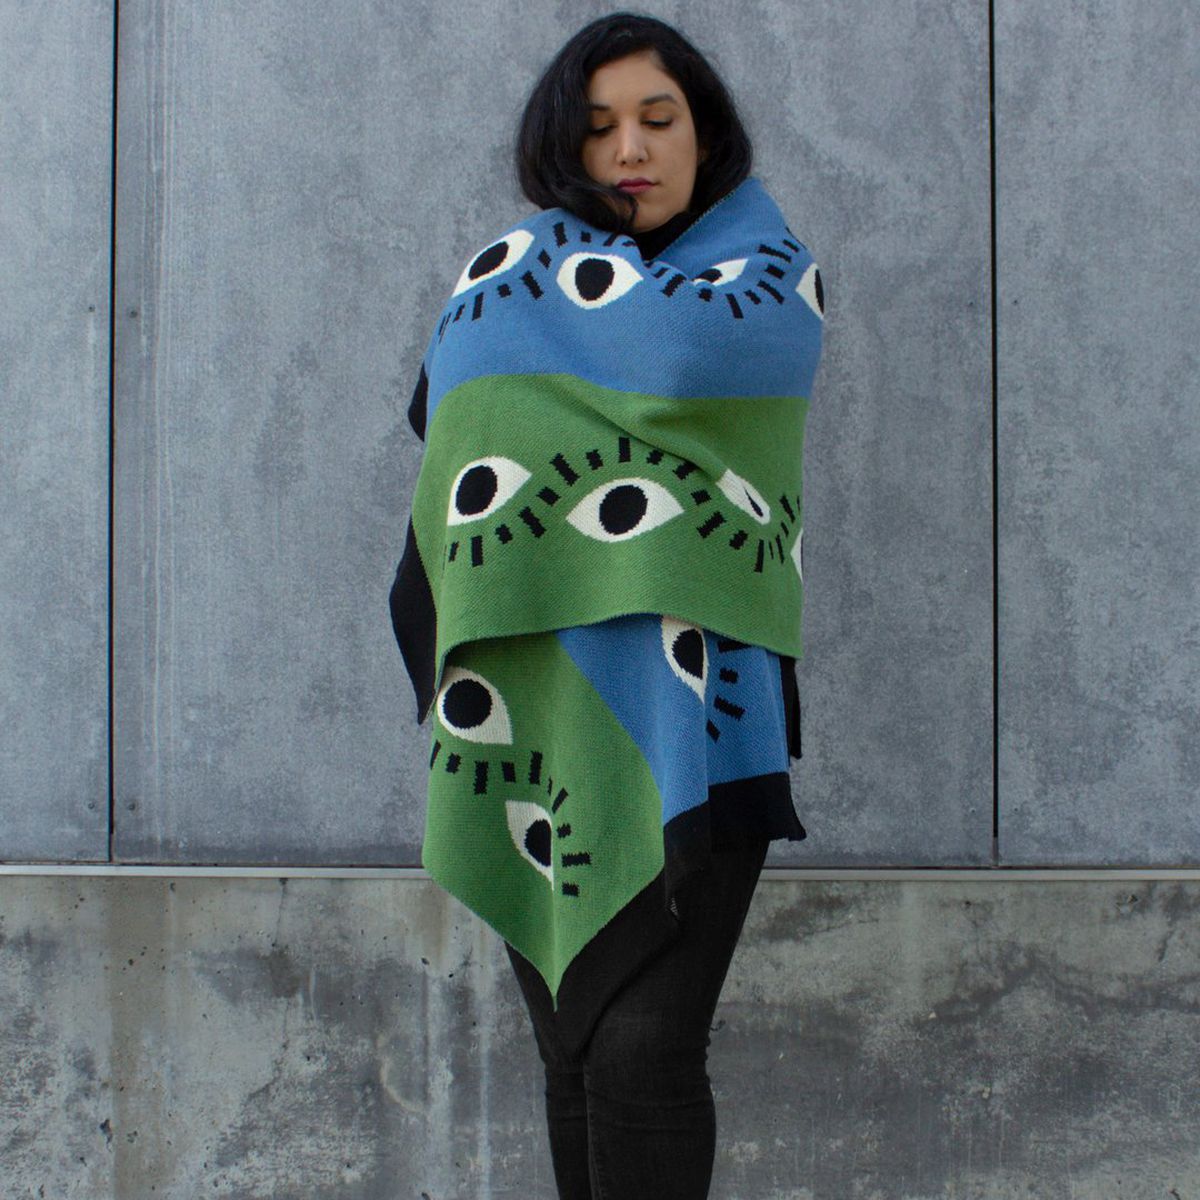 A woman wraps a green and blue blanket with eye motif around her body 